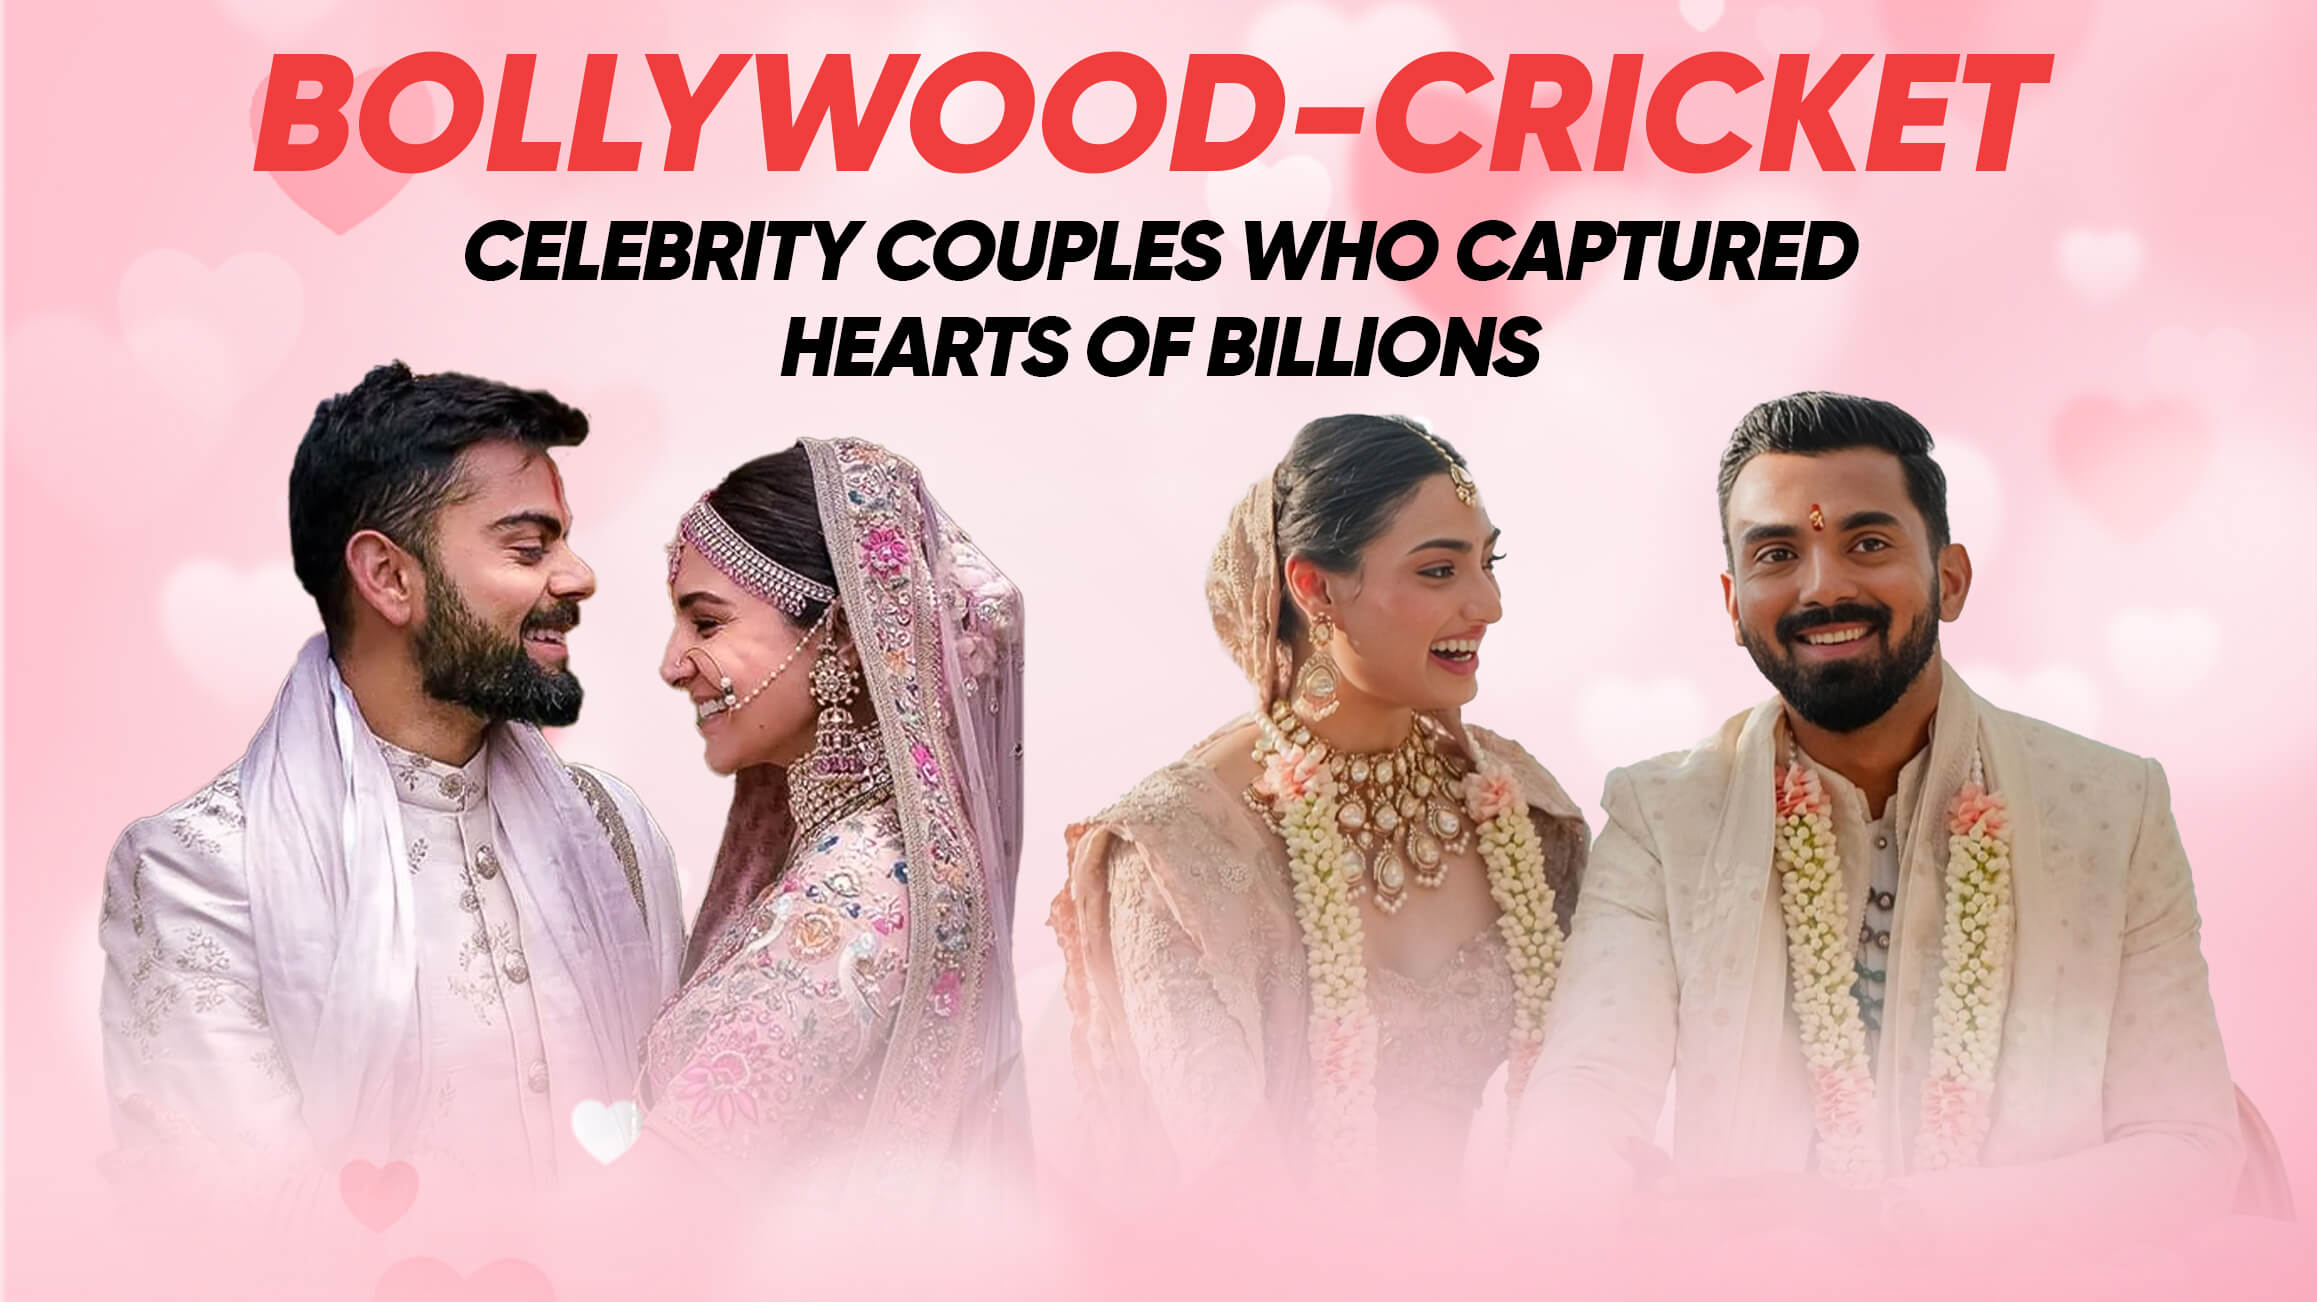 Bollywood-Cricket Celebrity Couples Who Captured Hearts of Billions